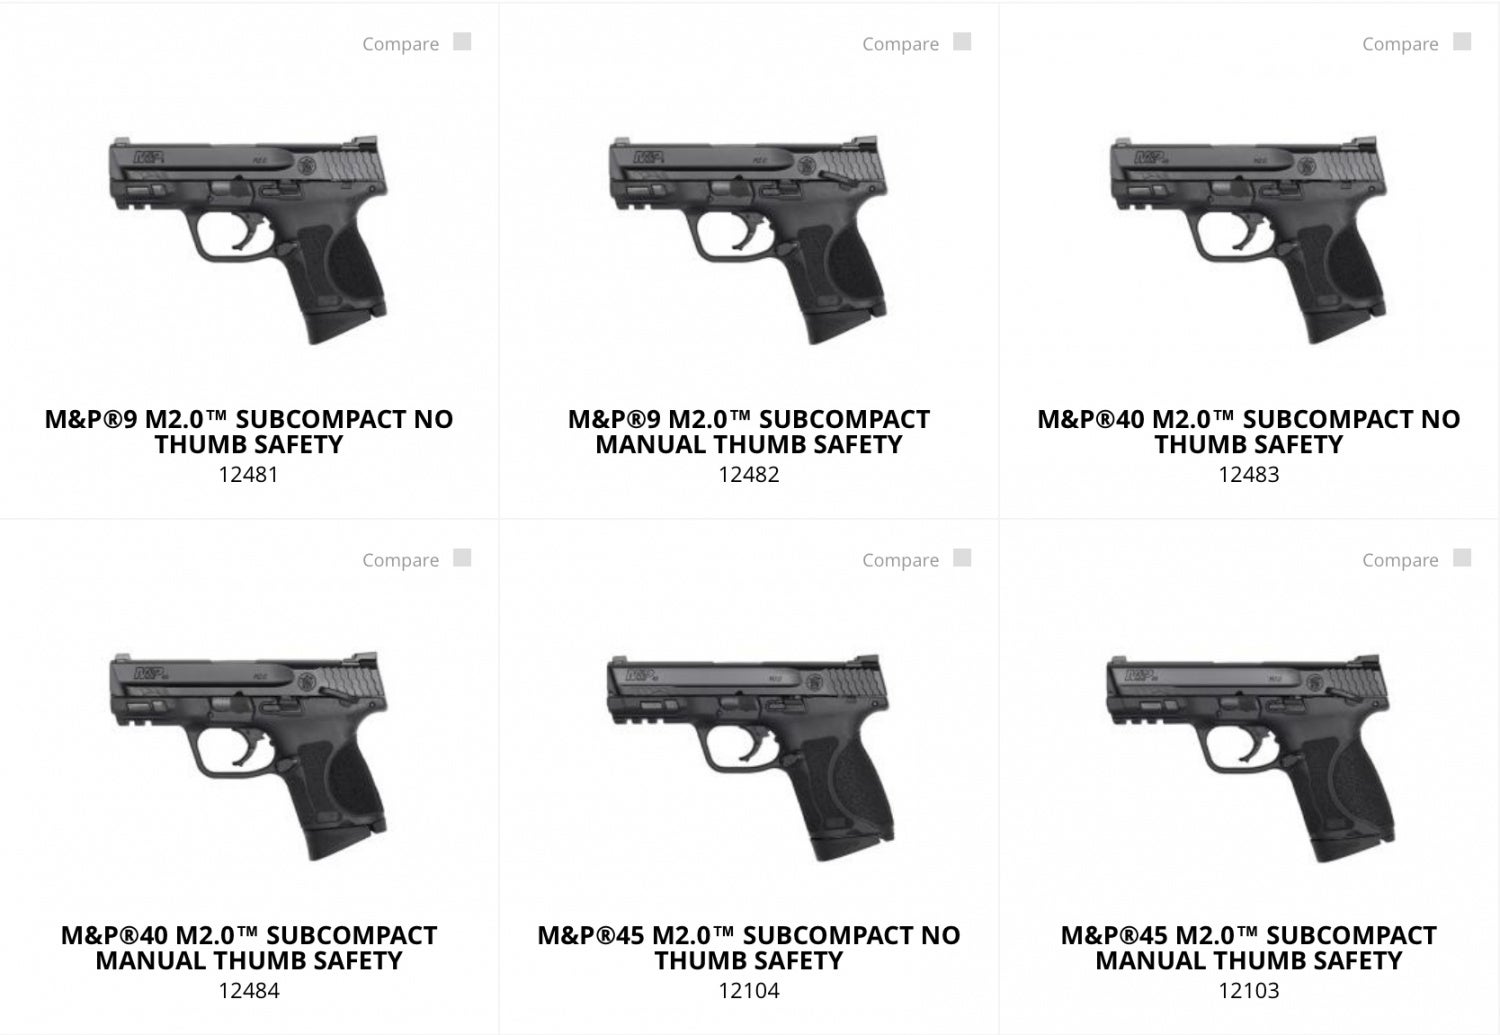 ANNOUNCED: S&W Releases Lineup Of M&P 2.0 Subcompact Pistols